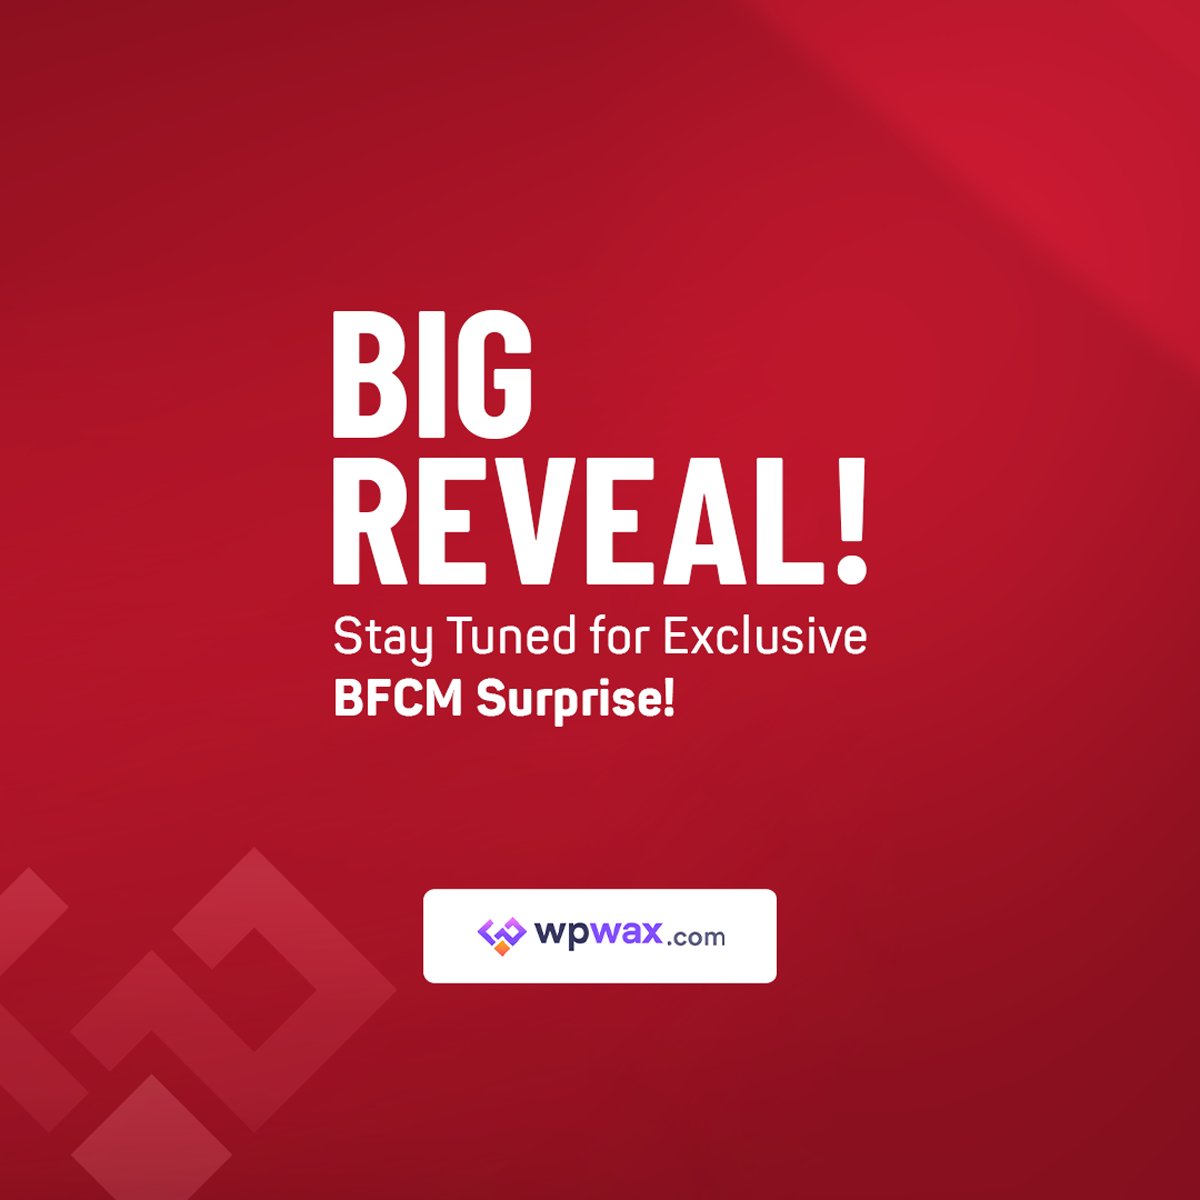 Ready for BFCM greatness? 🎉 Dive into mega deals, jaw-dropping discounts, and exclusive offers! The savings spree is about to ignite! 🔥

Deal Link: wpwax.com/discount-deal/

#bfcm #dealsondeals #savingsalert #blackfriday #cybermonday #wpwax #wpwaxdeals #bfcm2023 #megadeals